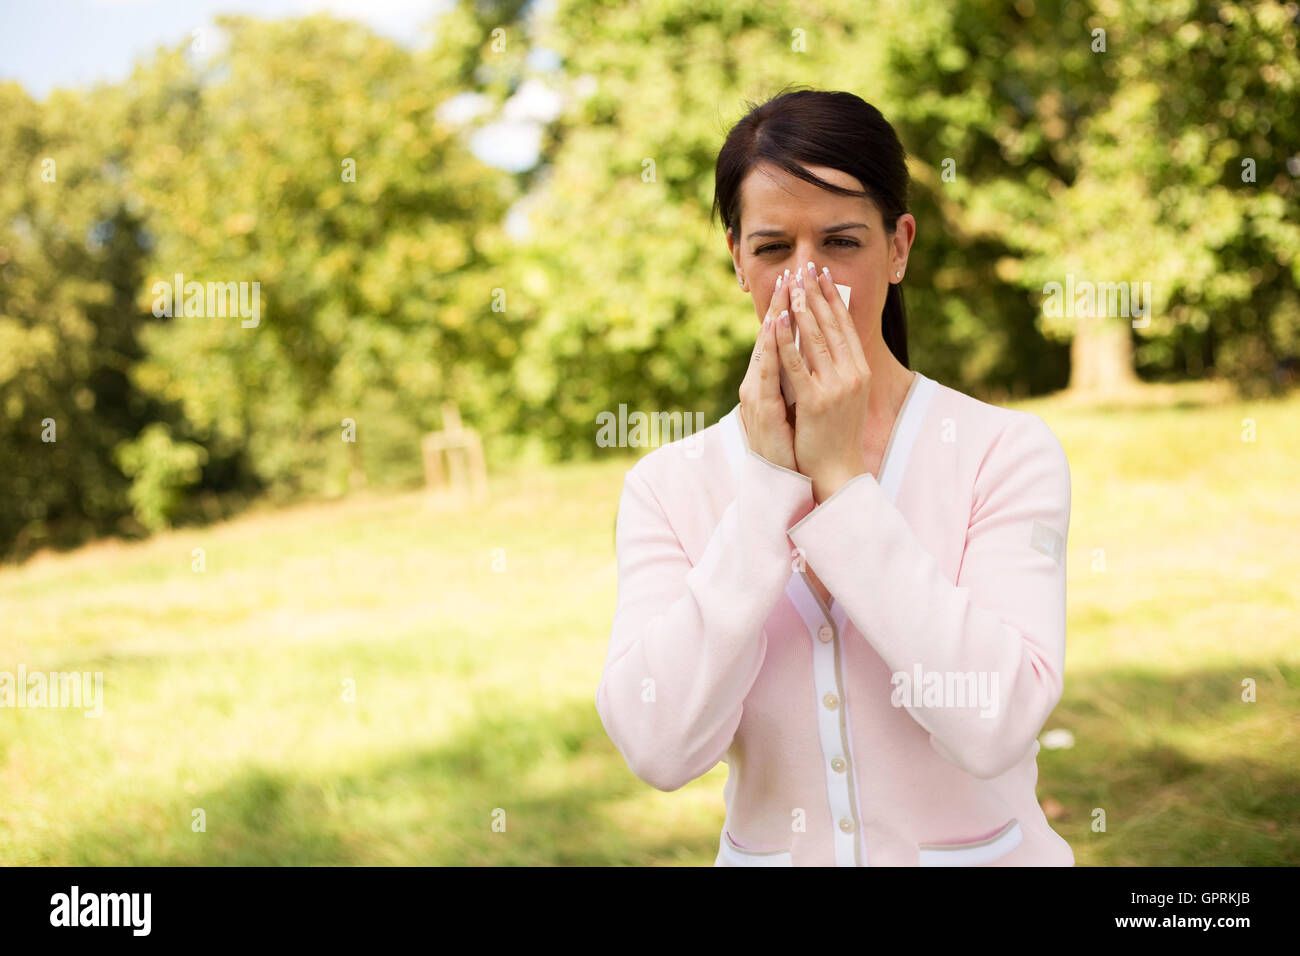 young woman suffering from hay fever Stock Photo